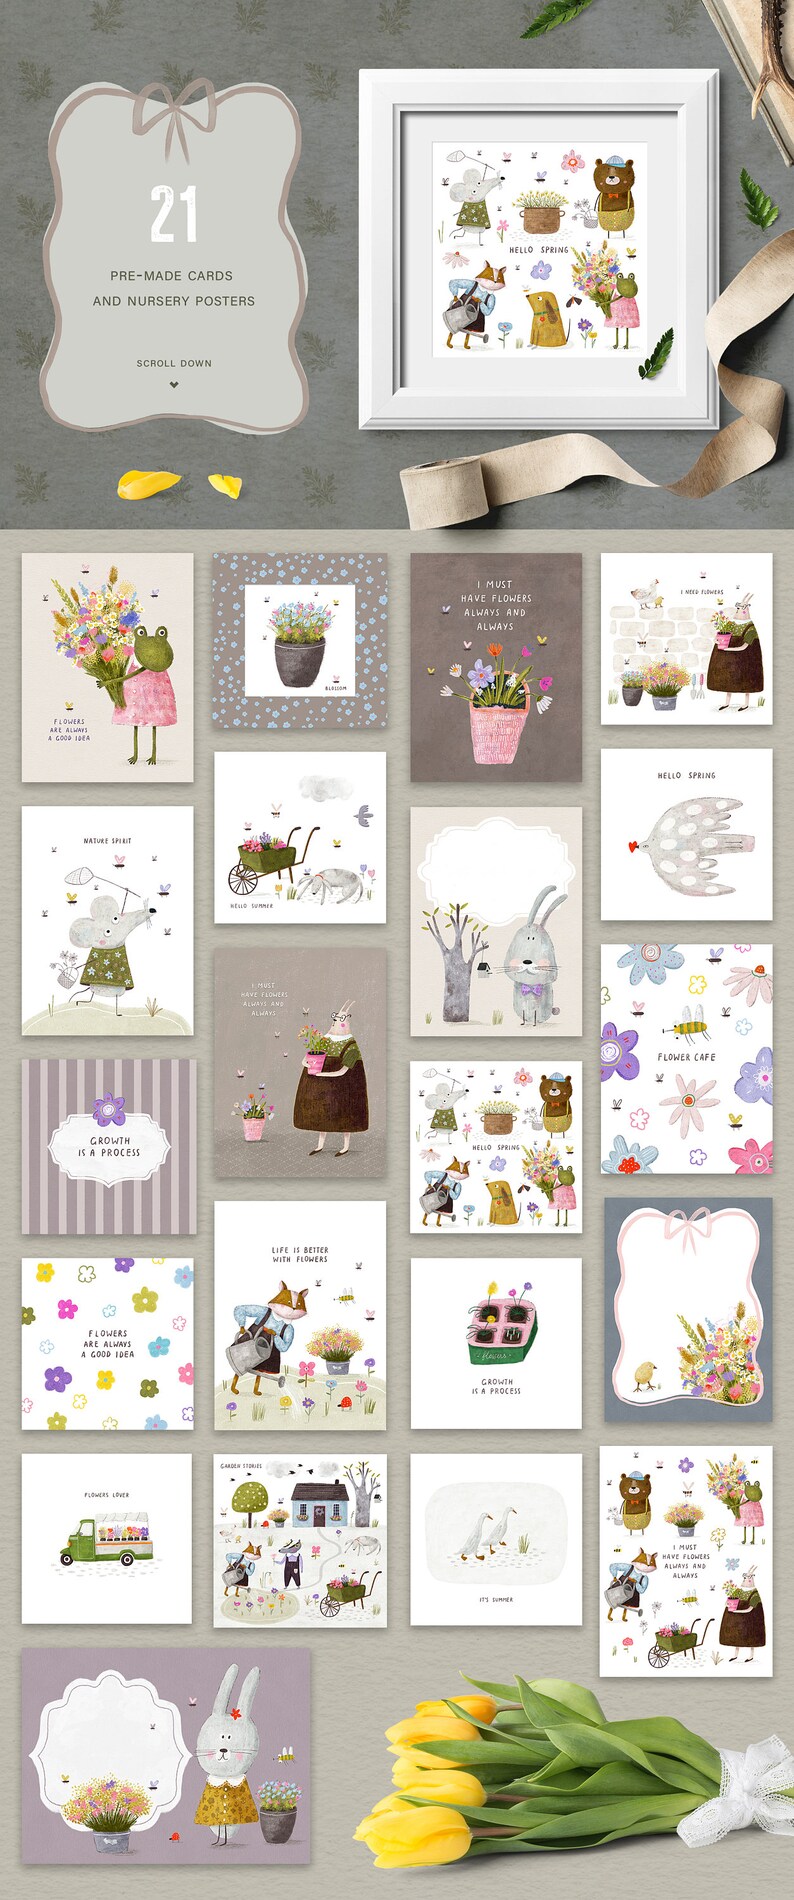 Spring clipart Baby birth announcement Wildflower bouquet Digital editable invitation template Handcrafted kids animals Birthday number PNG image 6